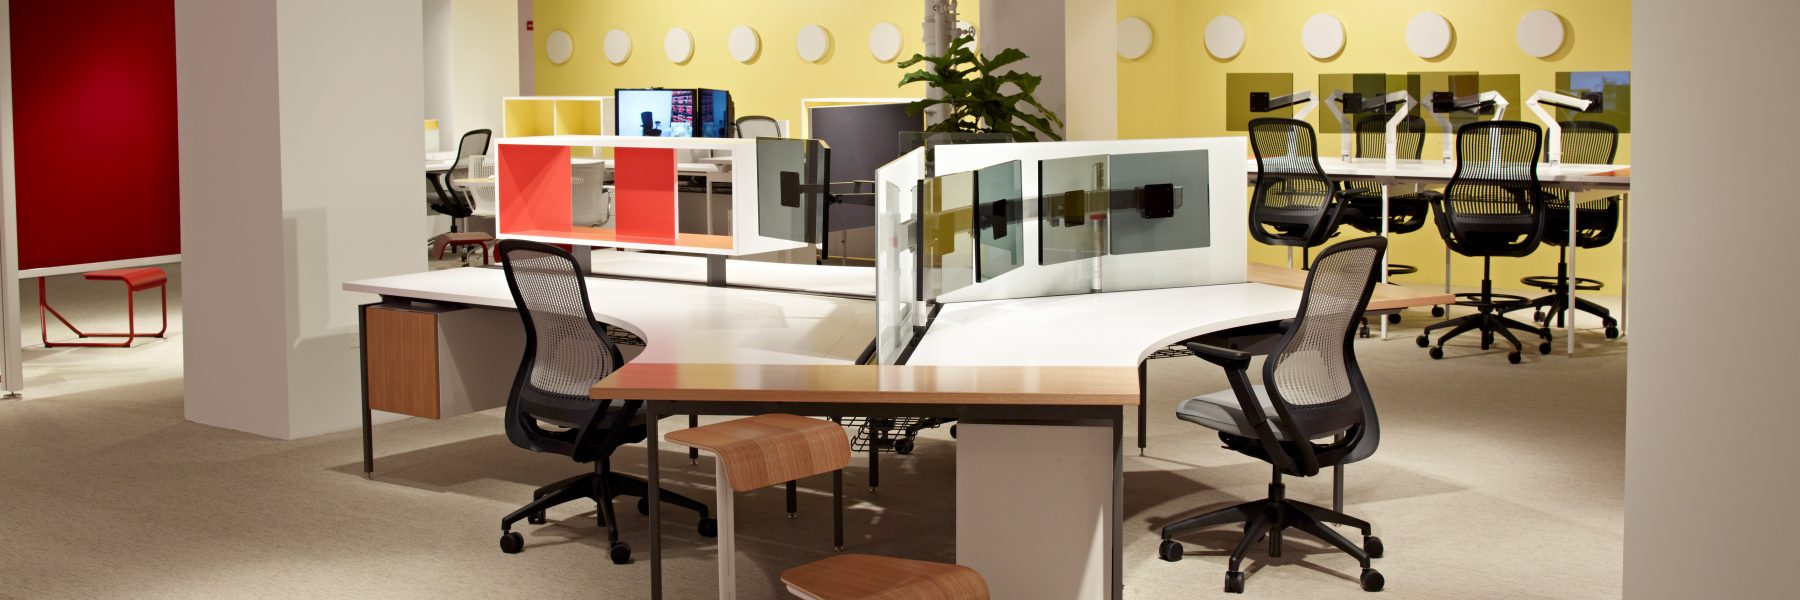  Create a modern workspace for productivity and collaboration.  